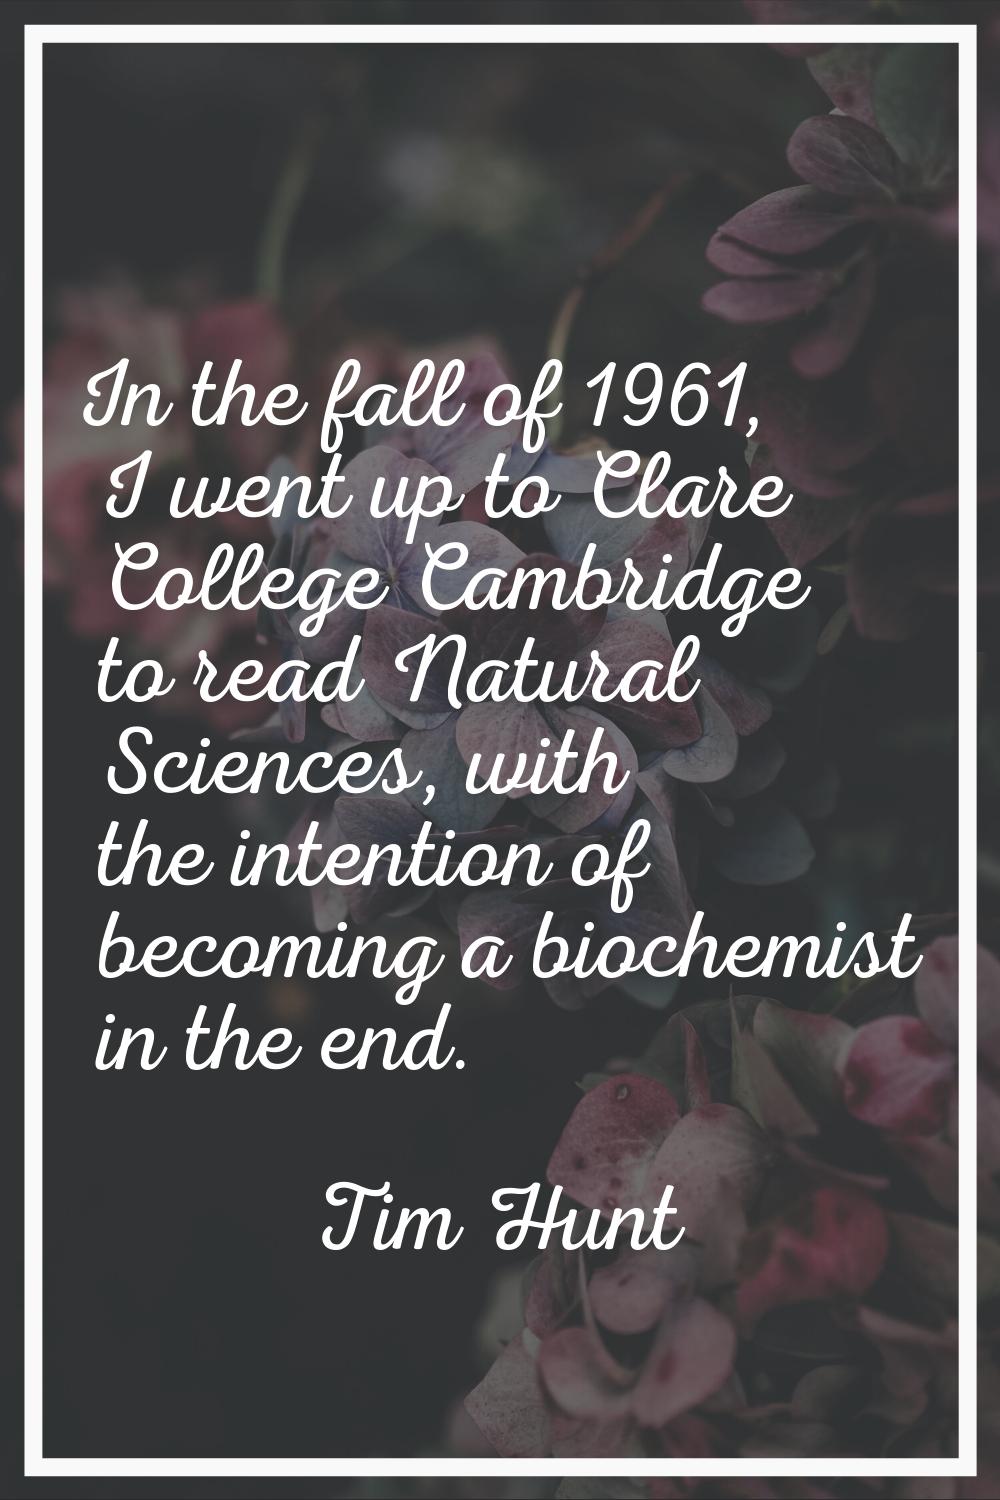 In the fall of 1961, I went up to Clare College Cambridge to read Natural Sciences, with the intent